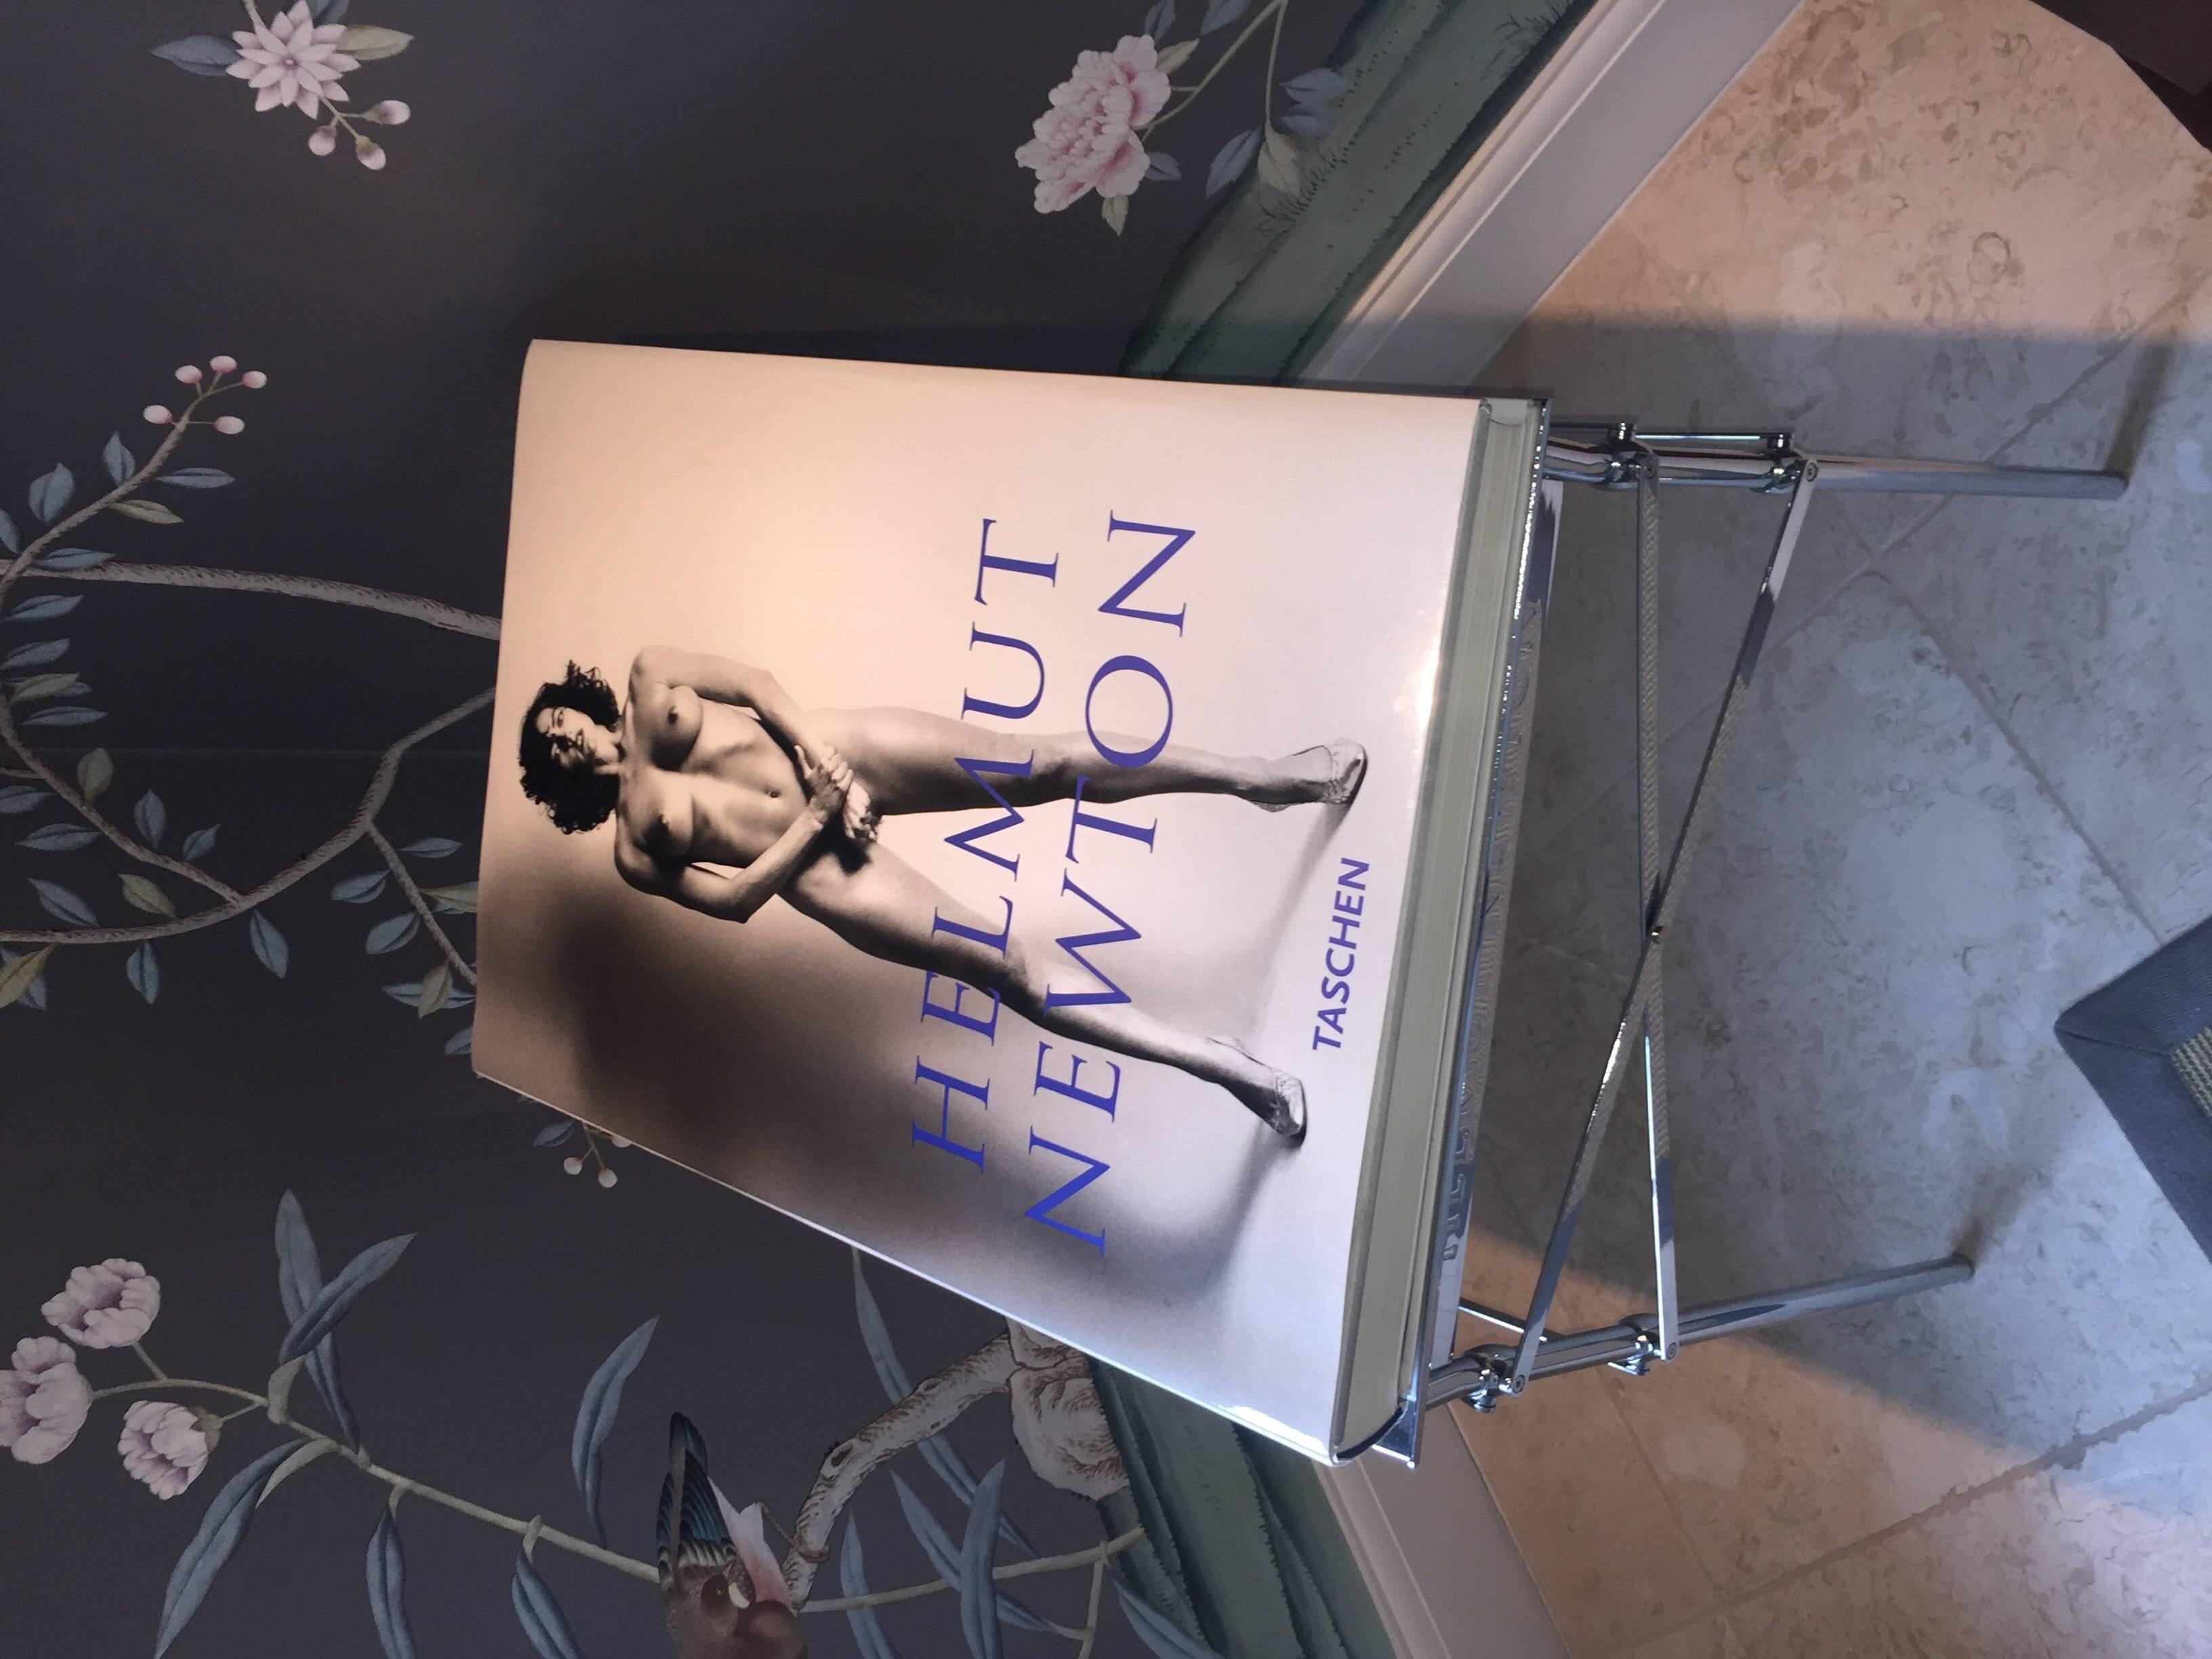 Modern Limited Edition 'Sumo' Book by Helmut Newton on Stand by Philippe Starck